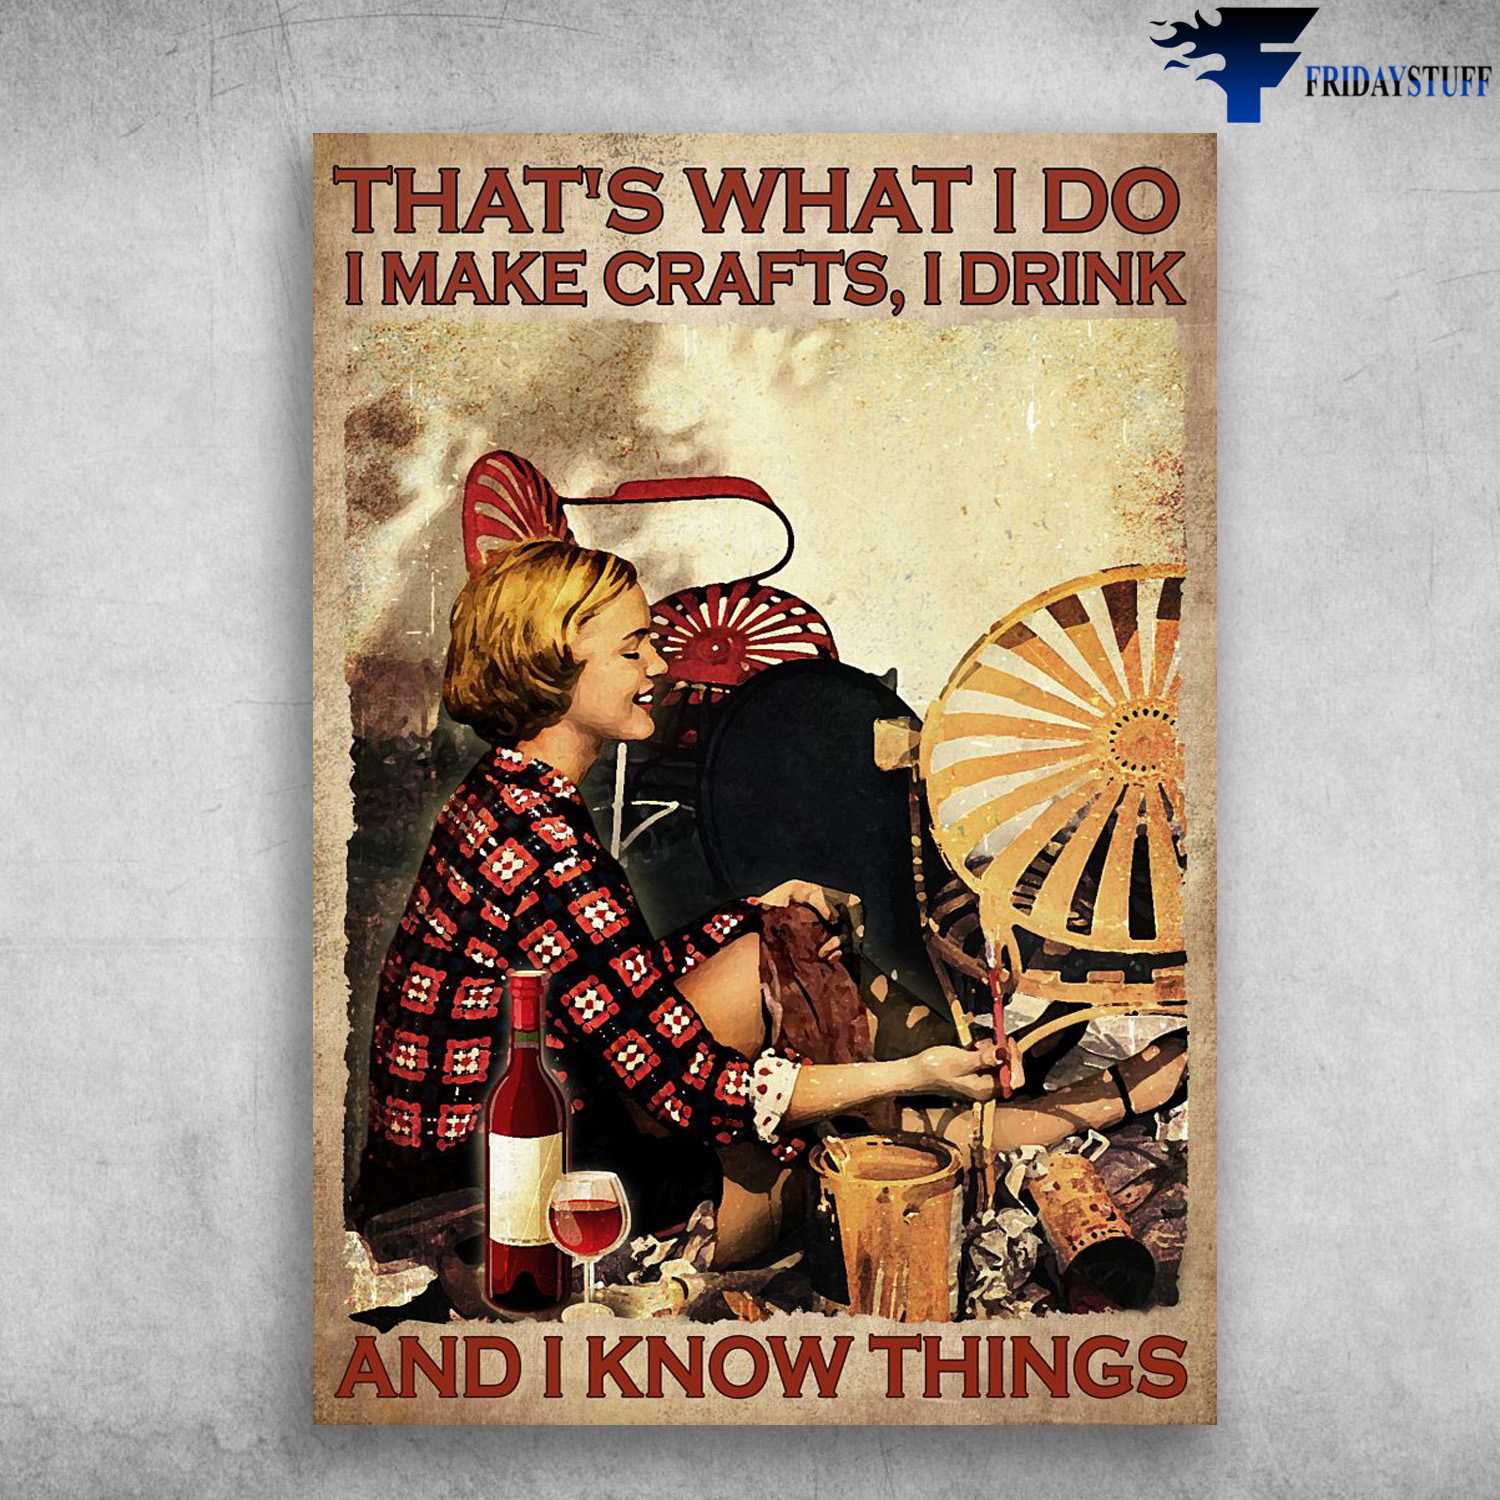 Crafts Maker, Wine Lover, That's What I Do, I Make Crafts, I Drink, And I Know Things